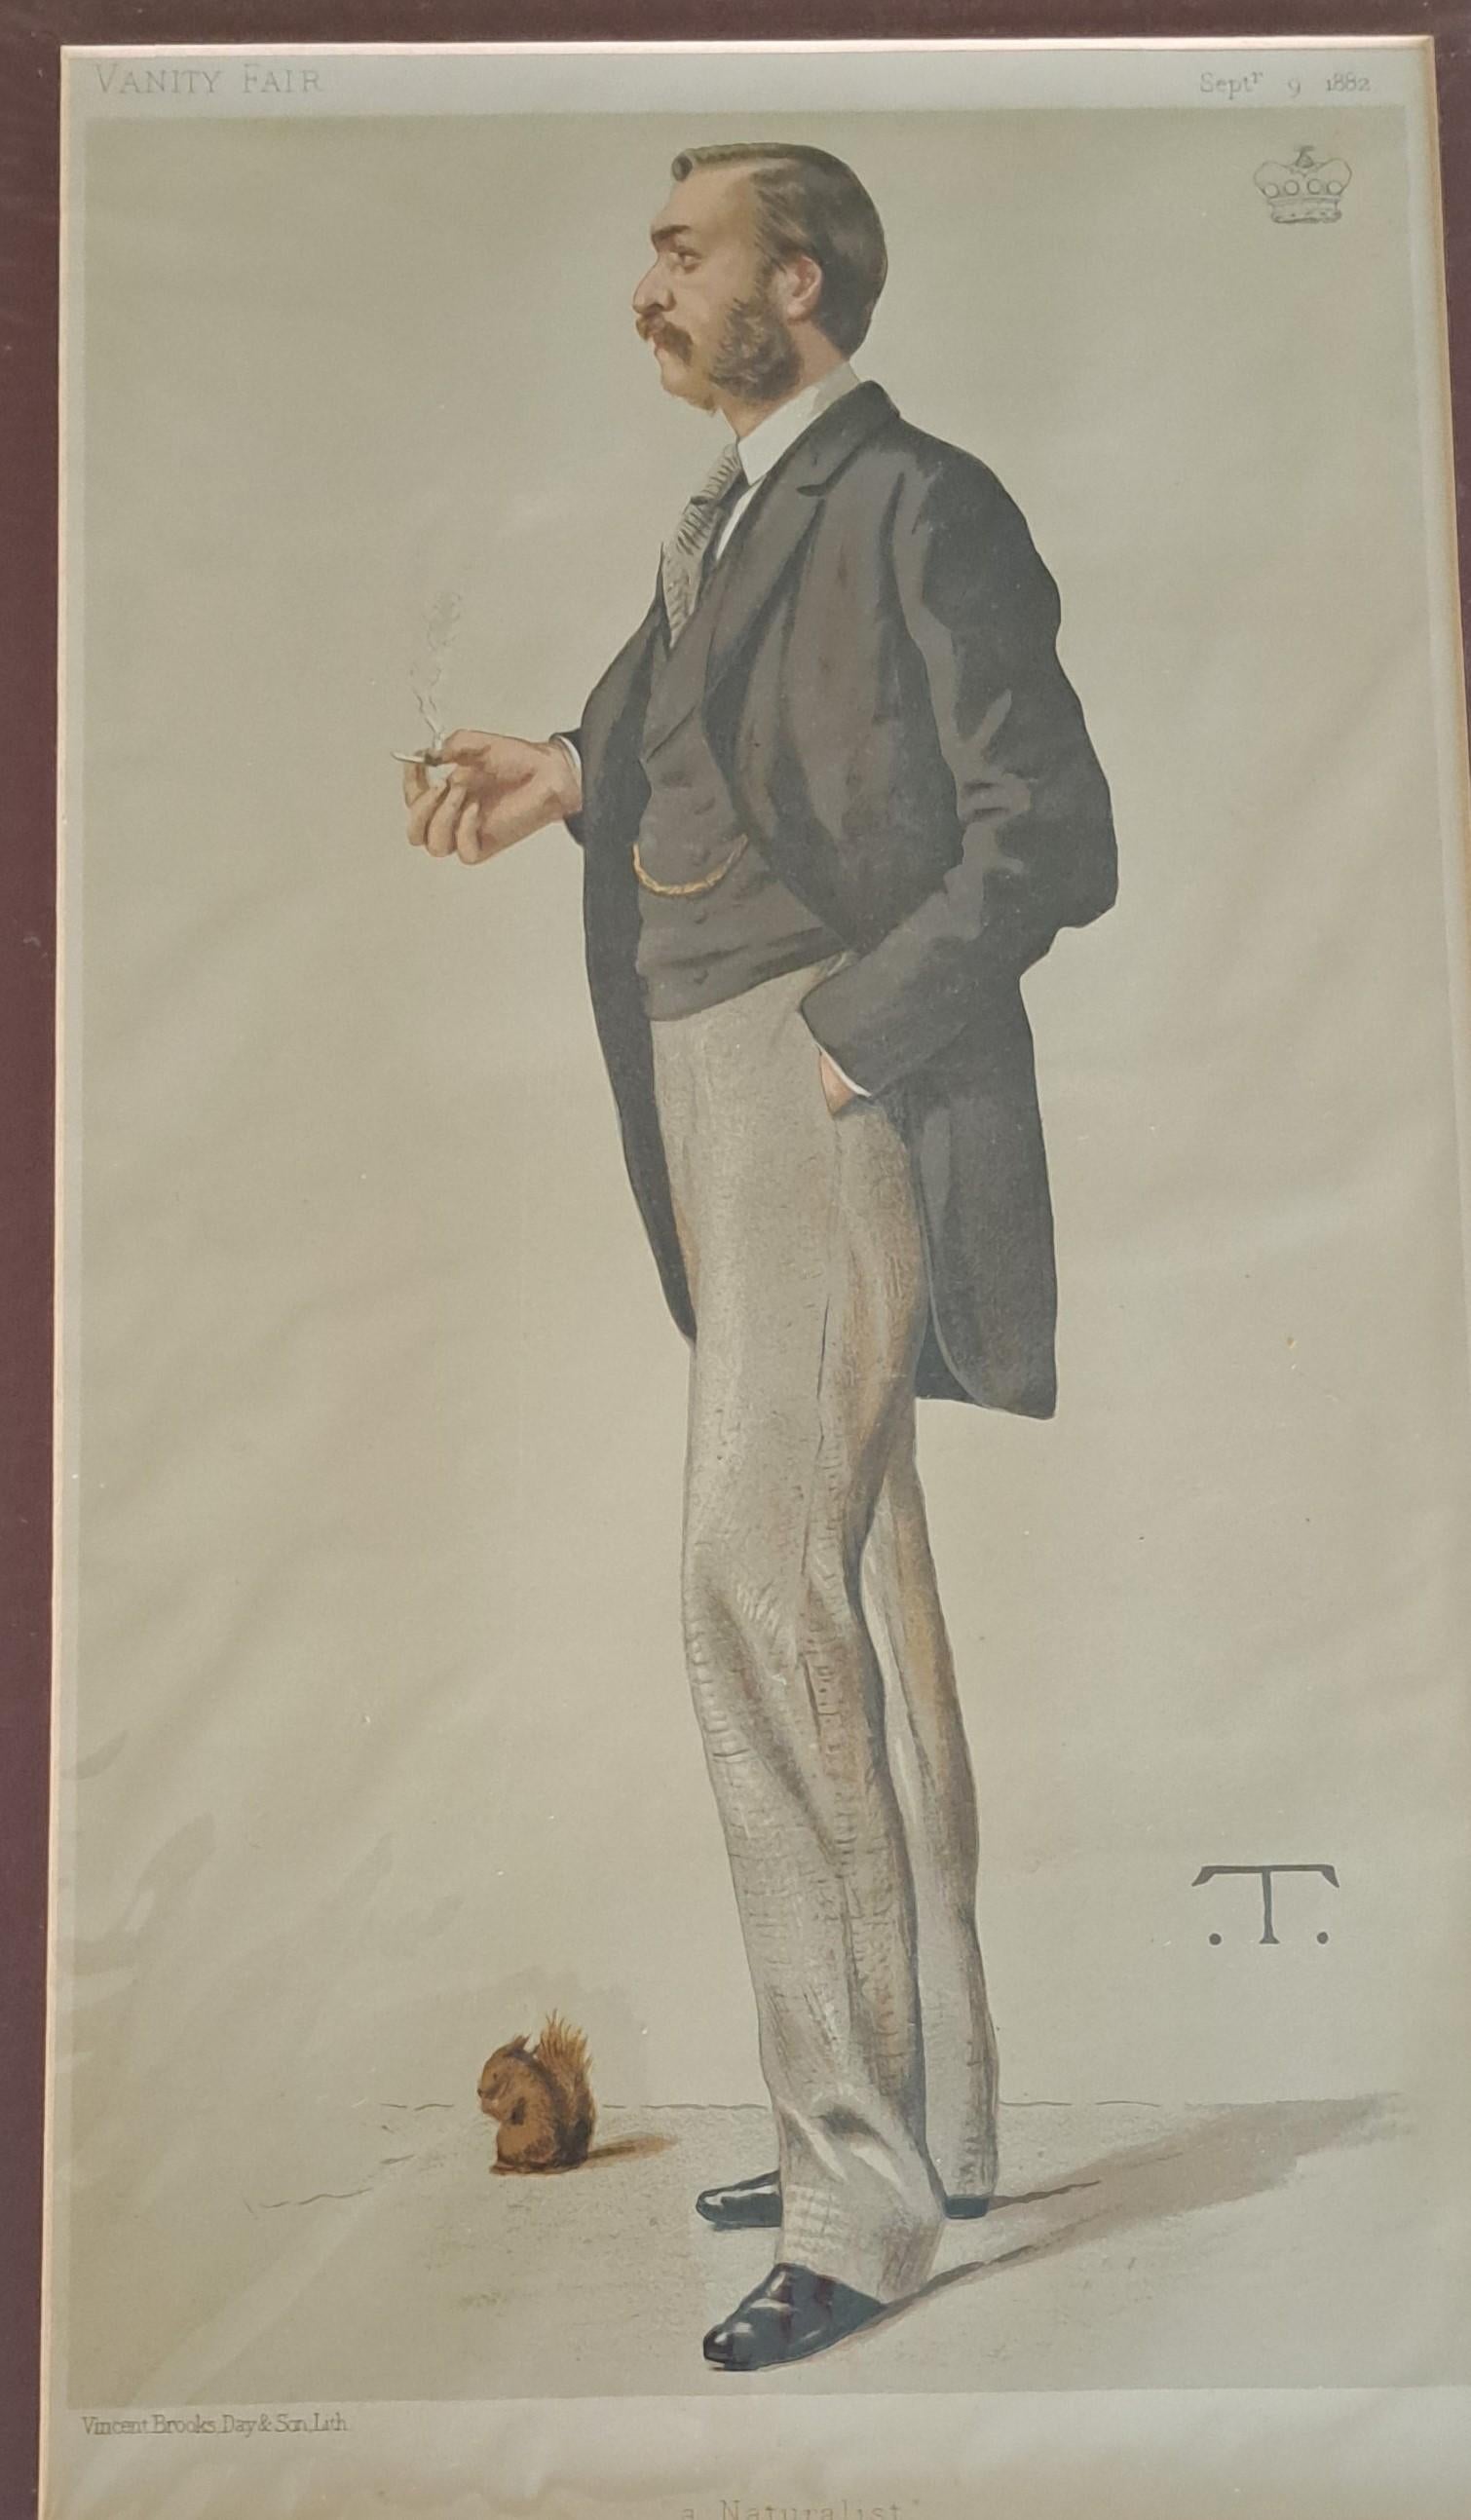 Vanity Fair Print, Statesman Lord Walsingham 
mounted size 49 x 34 cm in overall good condition unframed but comes with mount and description of sitter
 see below for details

I have a selection of vanity fair prints for sale acquired from a